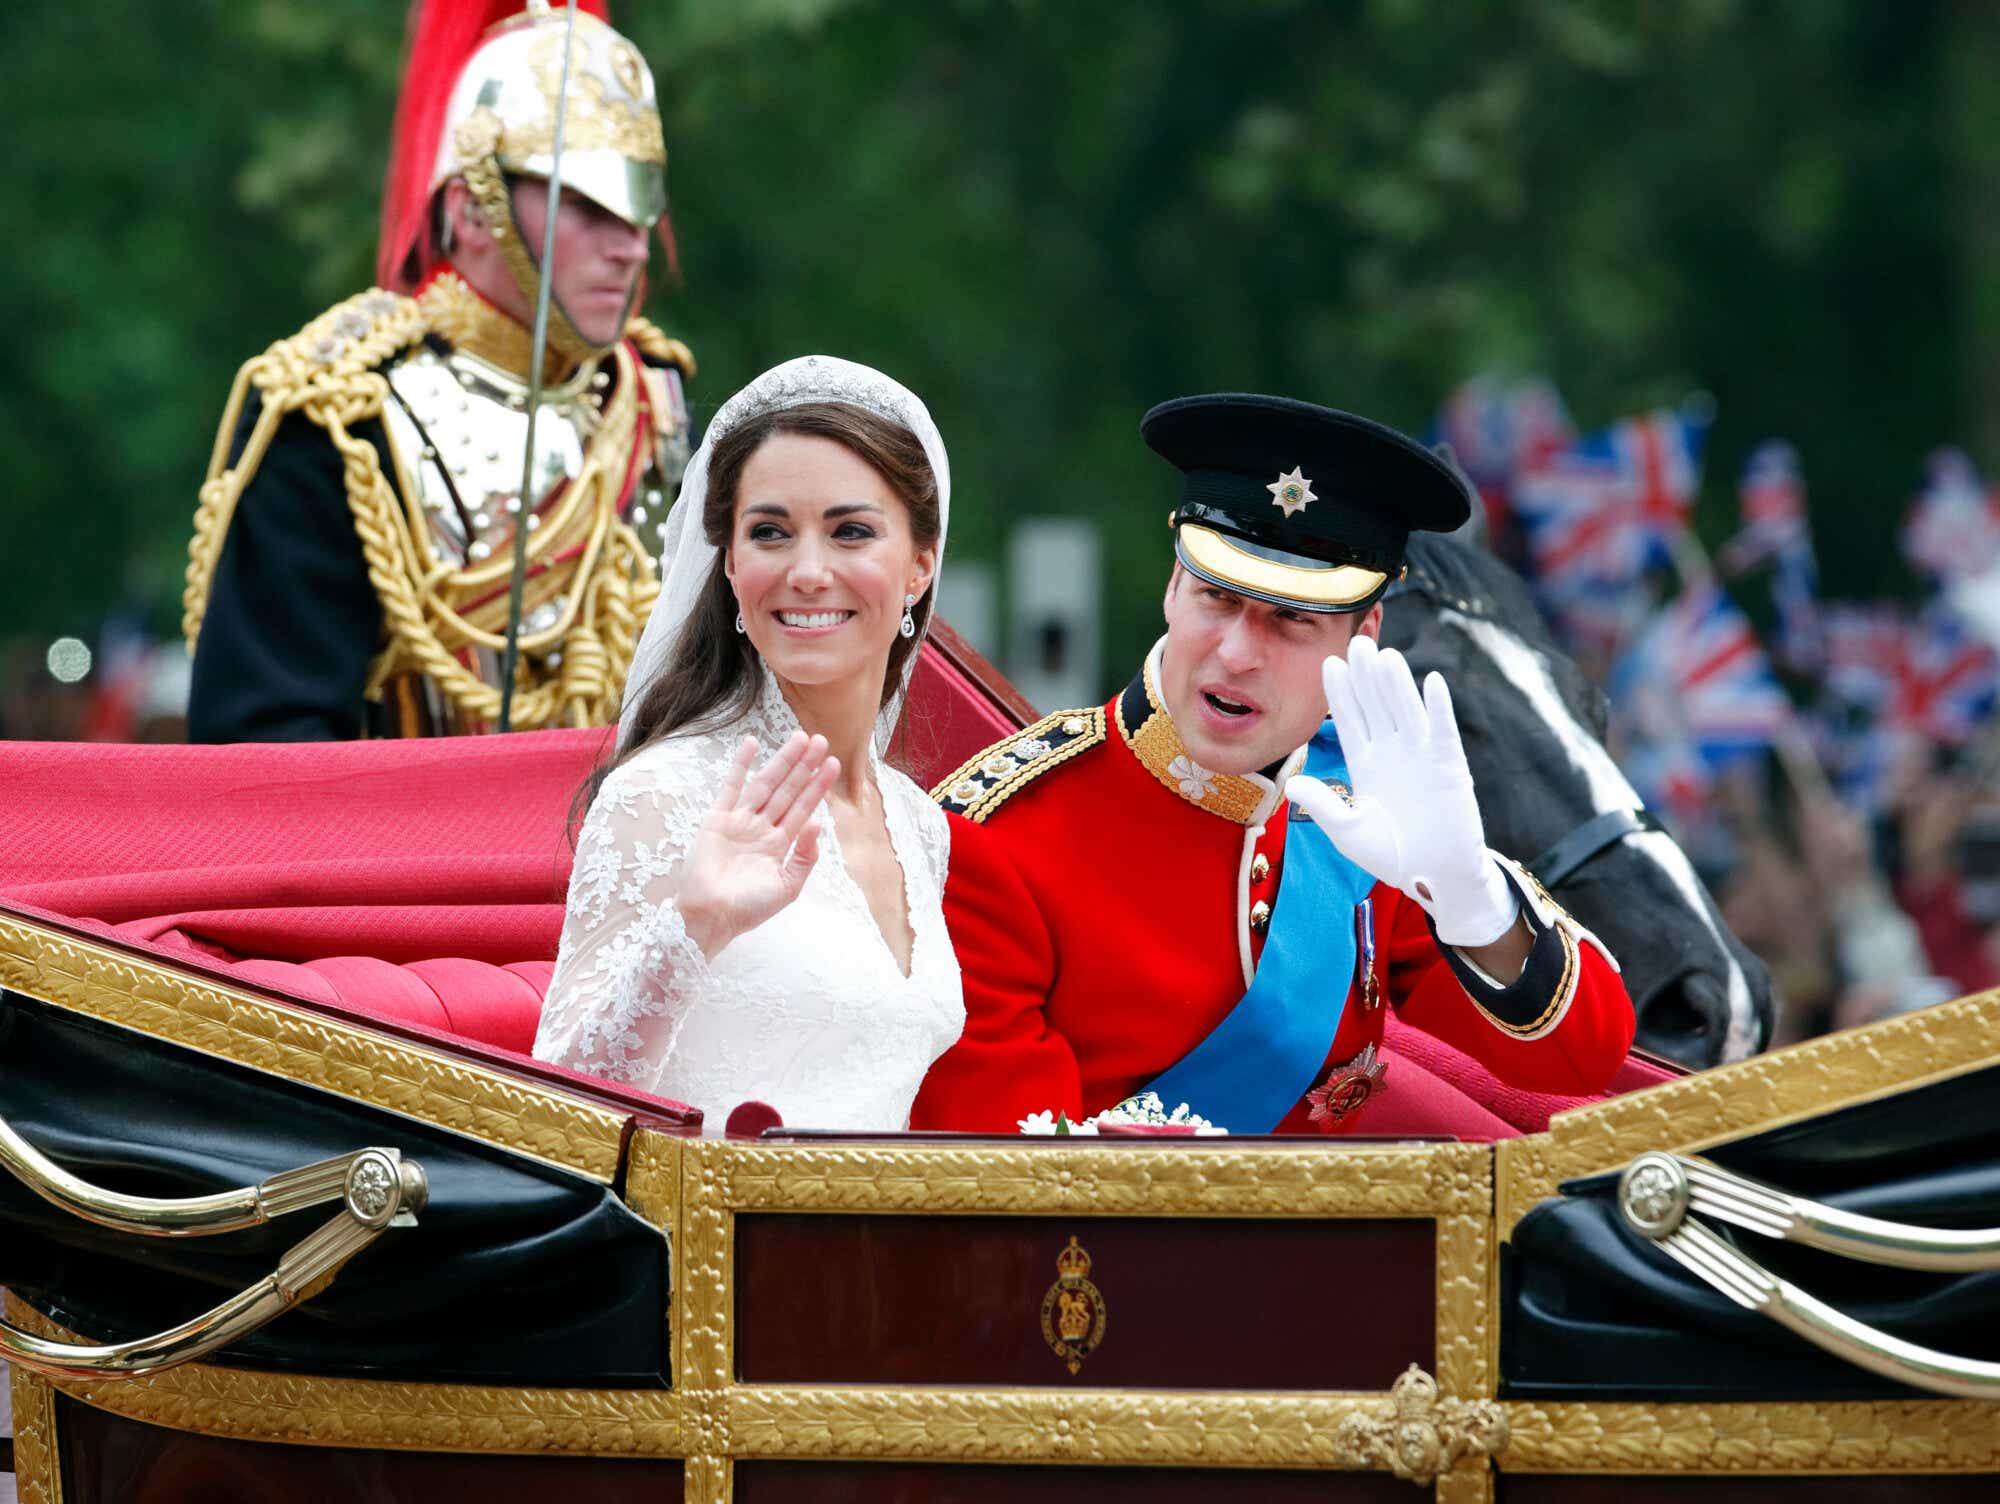 Catherine, Duchess of Cambridge and Prince William, Duke of Cambridge (wearing his red tunic uniform of the Irish Guards, of which he is Colonel) travel down The Mall, on route to Buckingham Palace, in the 1902 State Landau horse drawn carriage following their wedding ceremony at Westminster Abbey on April 29, 2011 in London, England. 